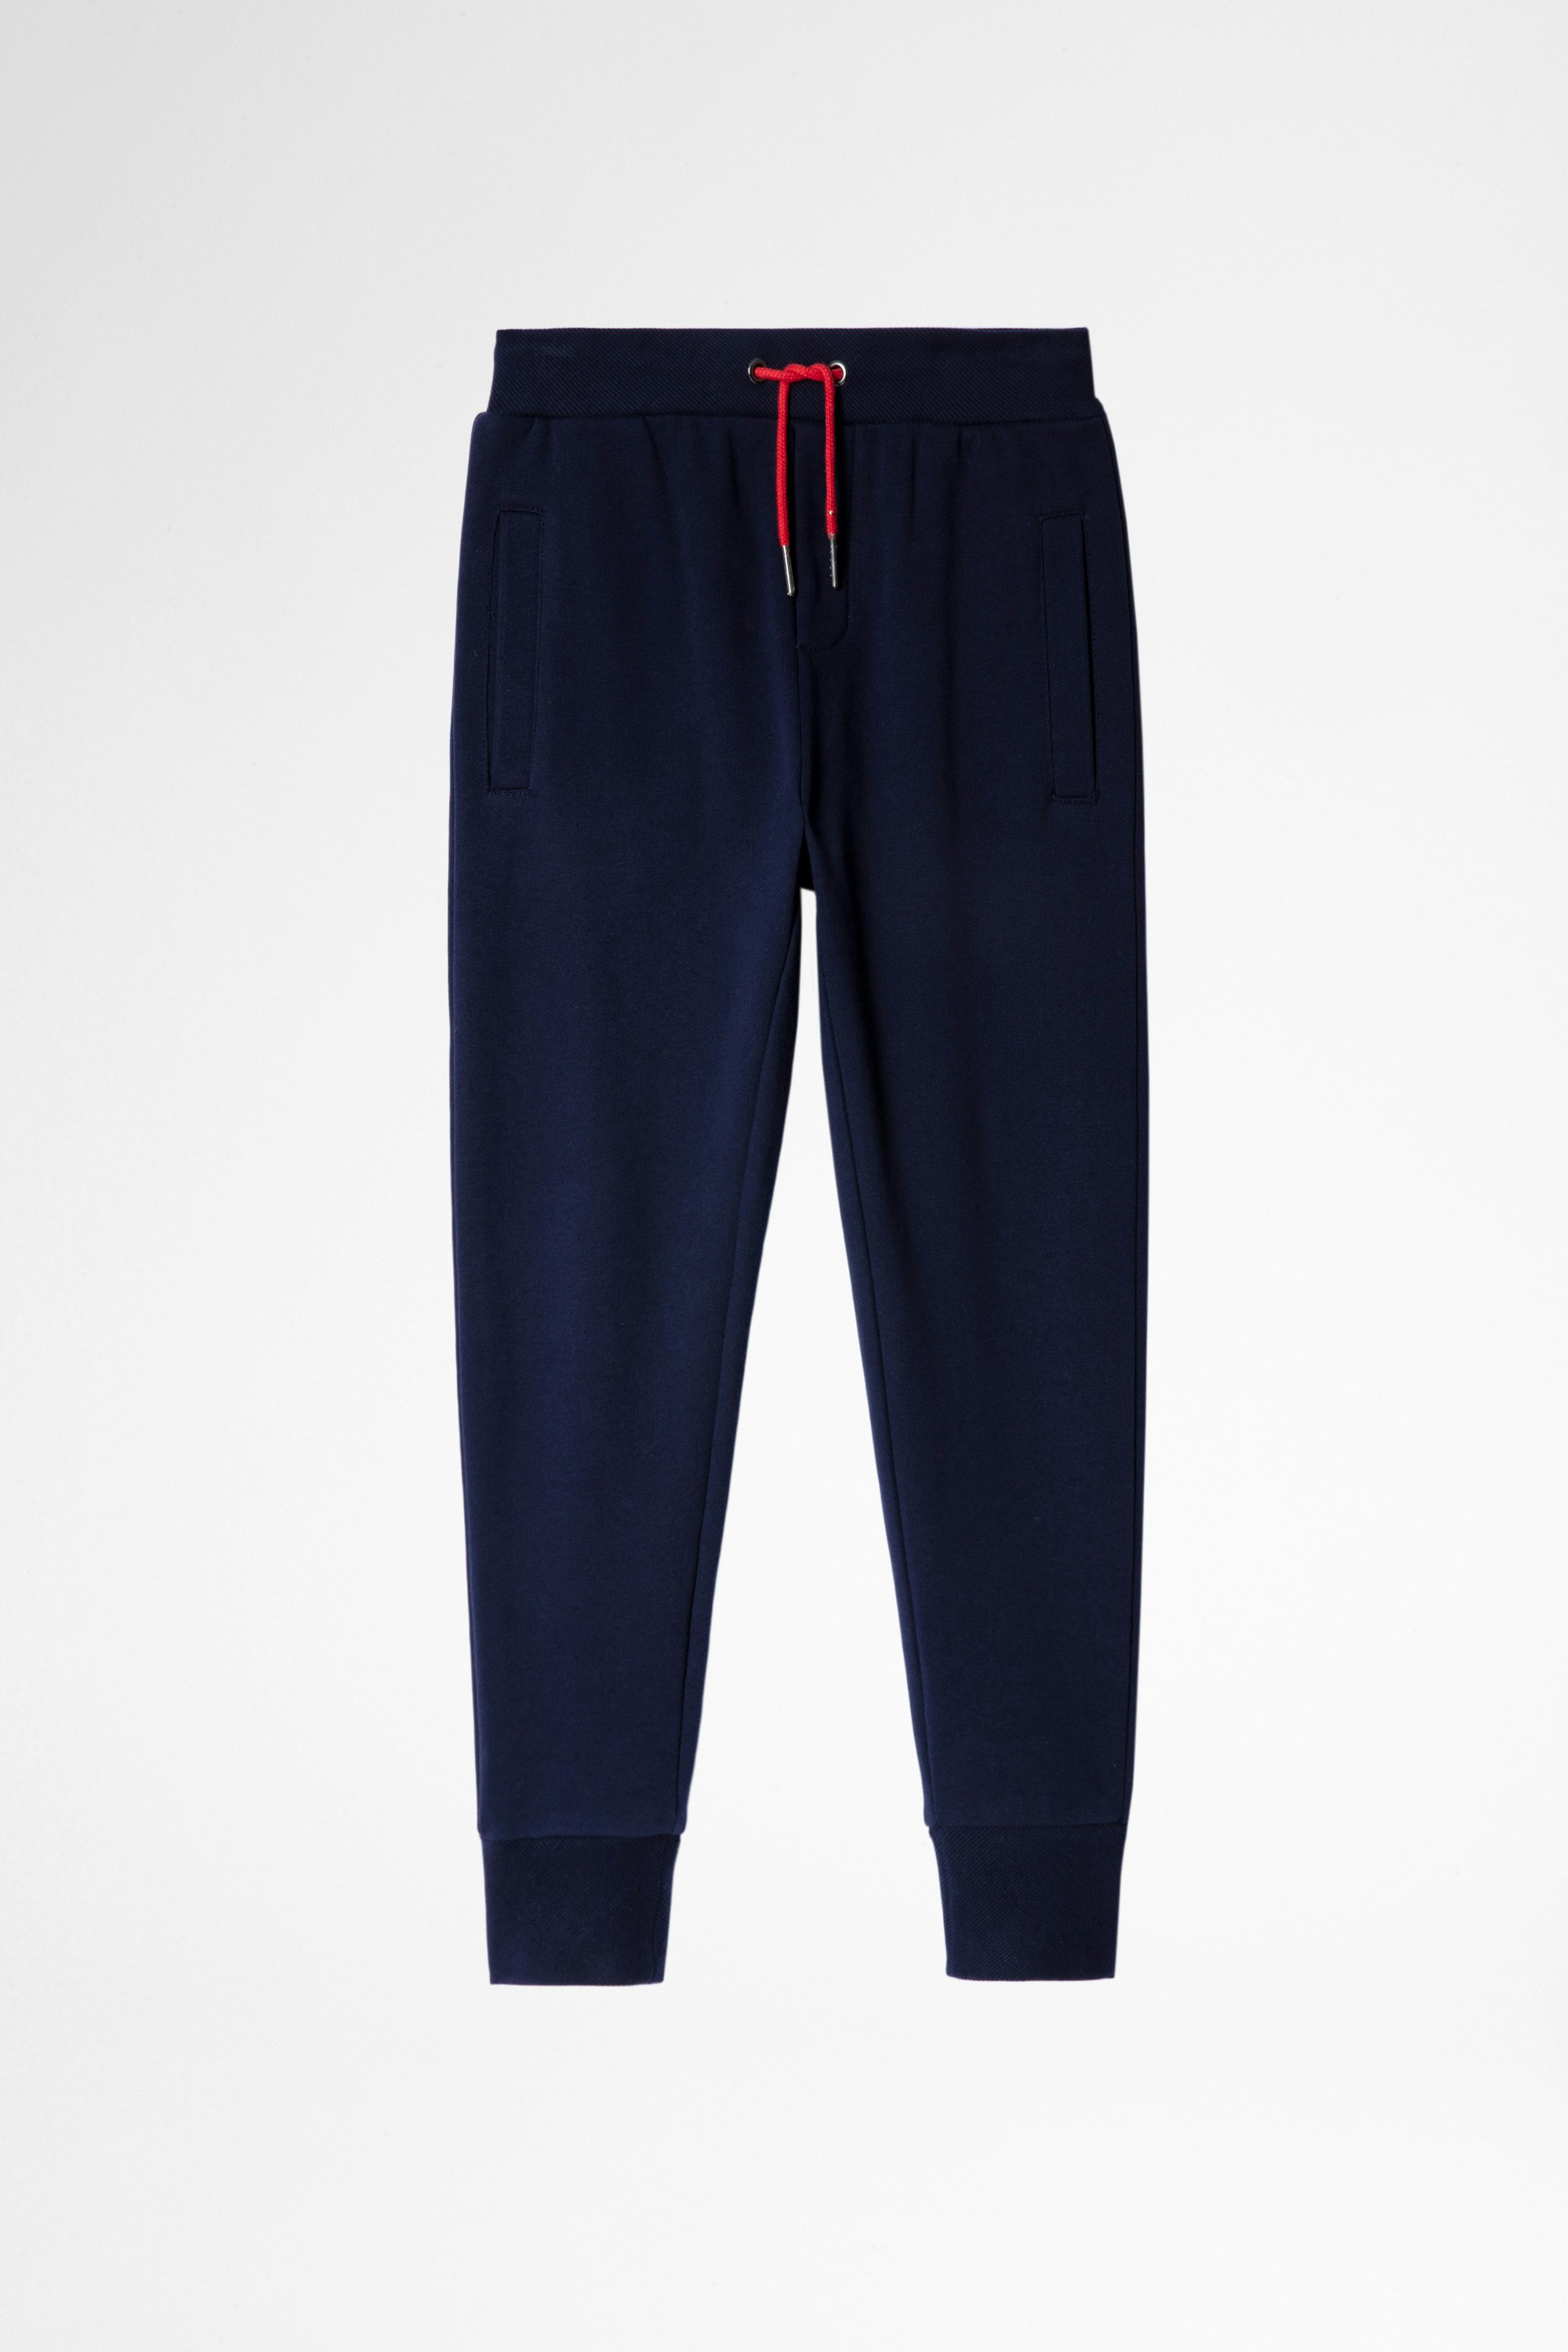 Lemmy Children's Trousers Children's cotton trackpants in blue